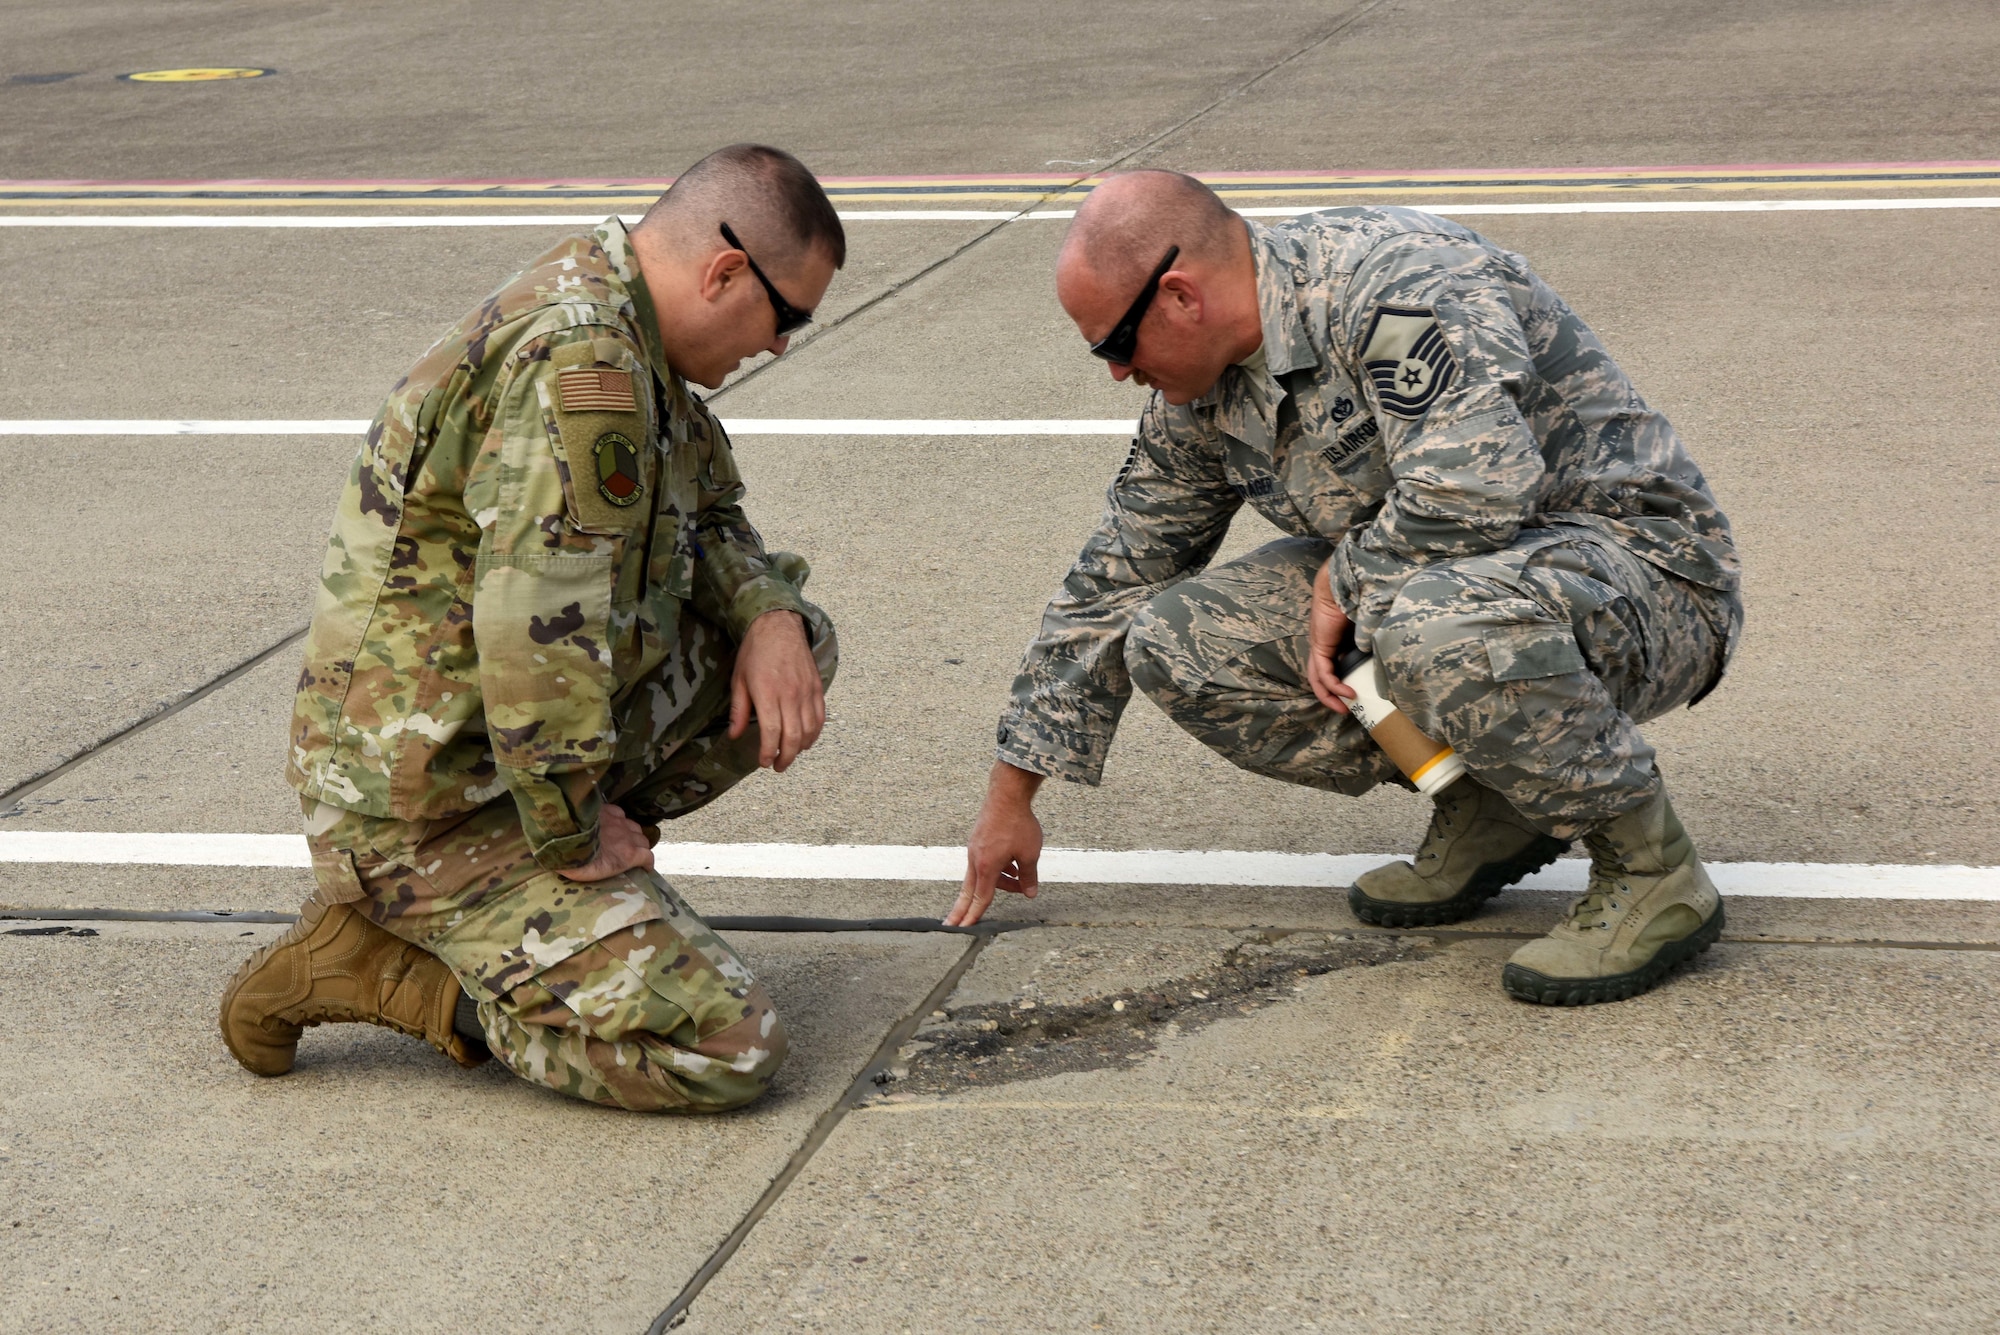 U.S. Air Force Tech. Sgt. Andrew Perna, 39th Civil Engineer Squadron pavement grounds contracting office representative, and Master Sgt. Gerald Bontrager, 39th CES first sergeant, inspect the airfield during Paver training Oct. 22, 2019, at Incirlik Air Base, Turkey. Paver is a software program that allows managers to prioritize airfield repairs to keep the airfield operational and keep costs low. (U.S. Air Force photo by Tech. Sgt. Jim Araos)